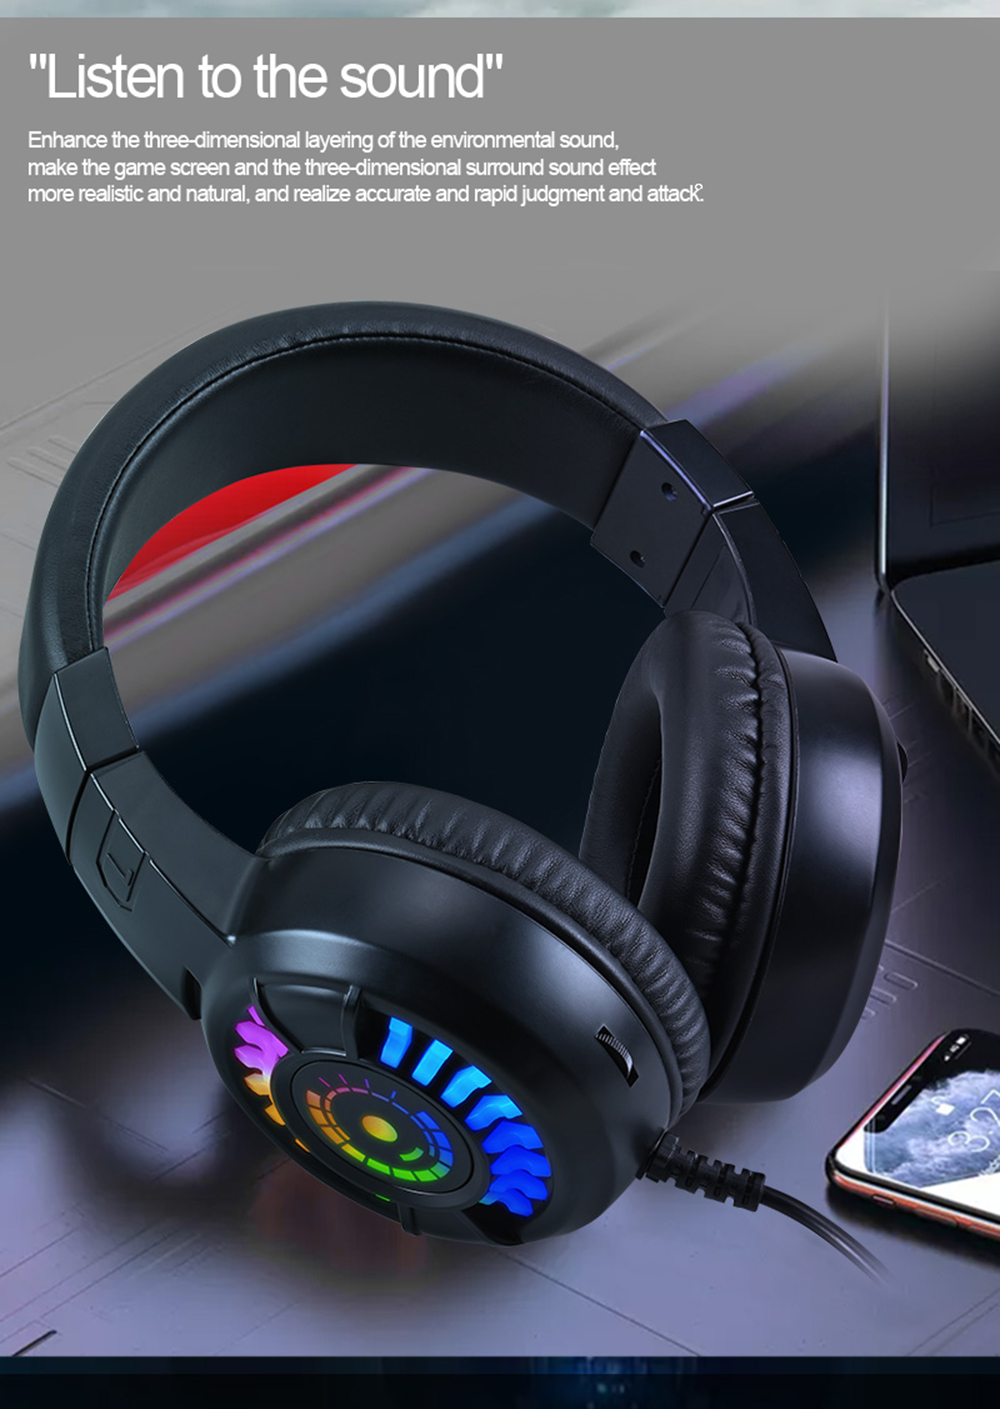 198I-A7-E-sport-Gaming-Headset-50mm-Unit-55mm-Speaker-Size-Cool-Lighting-Built-in-Microphone-35mmUSB-1802467-6